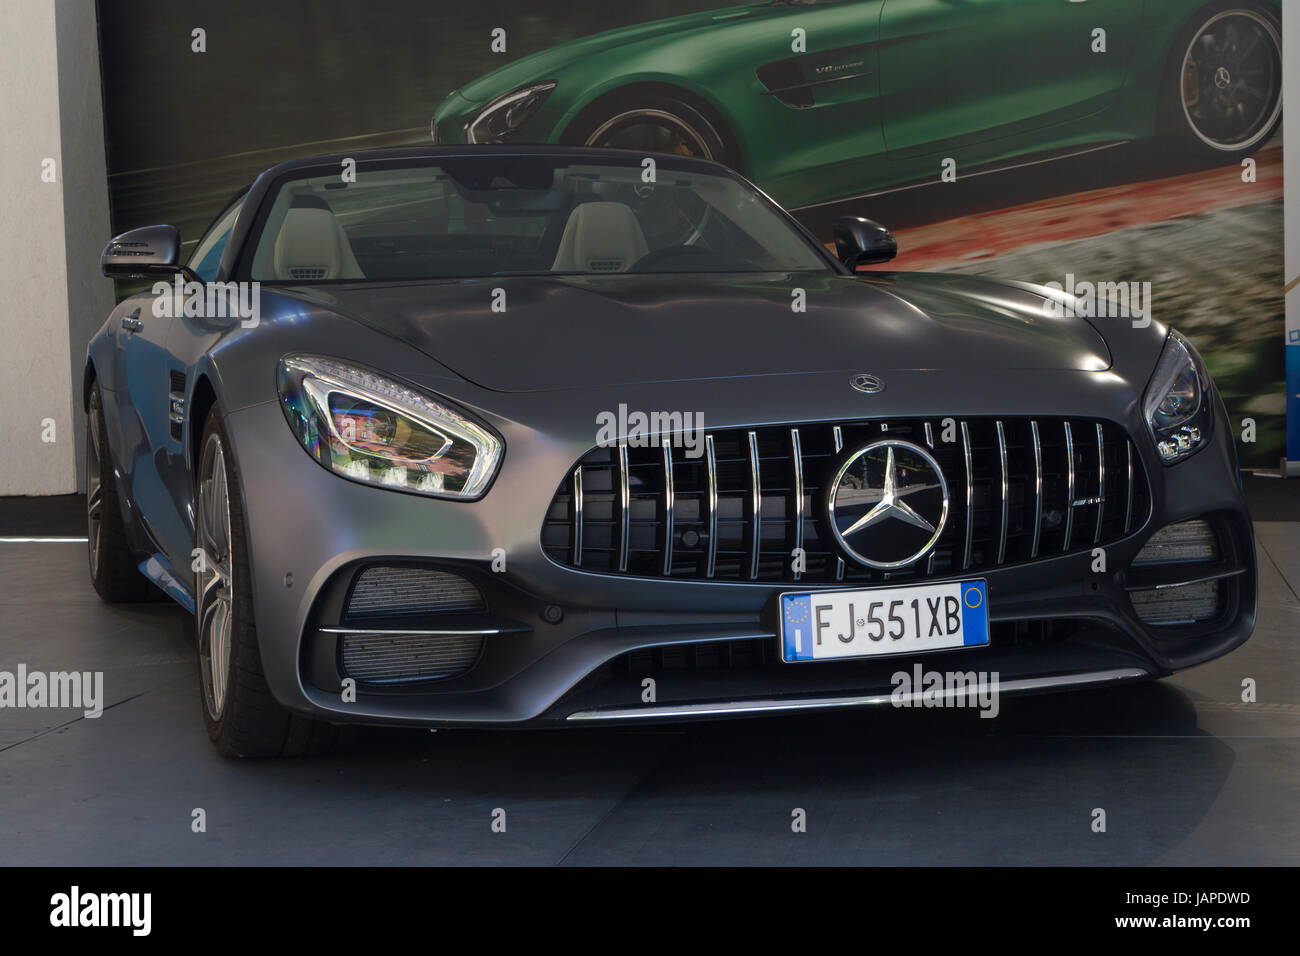 Turin, Italy, 7th June 2017. A Mercedes AMG GT R. Third edition of Parco Valentino car show hosts cars by many automobile manufacturers and car designers inside Valentino Park in Torino, Italy. Stock Photo